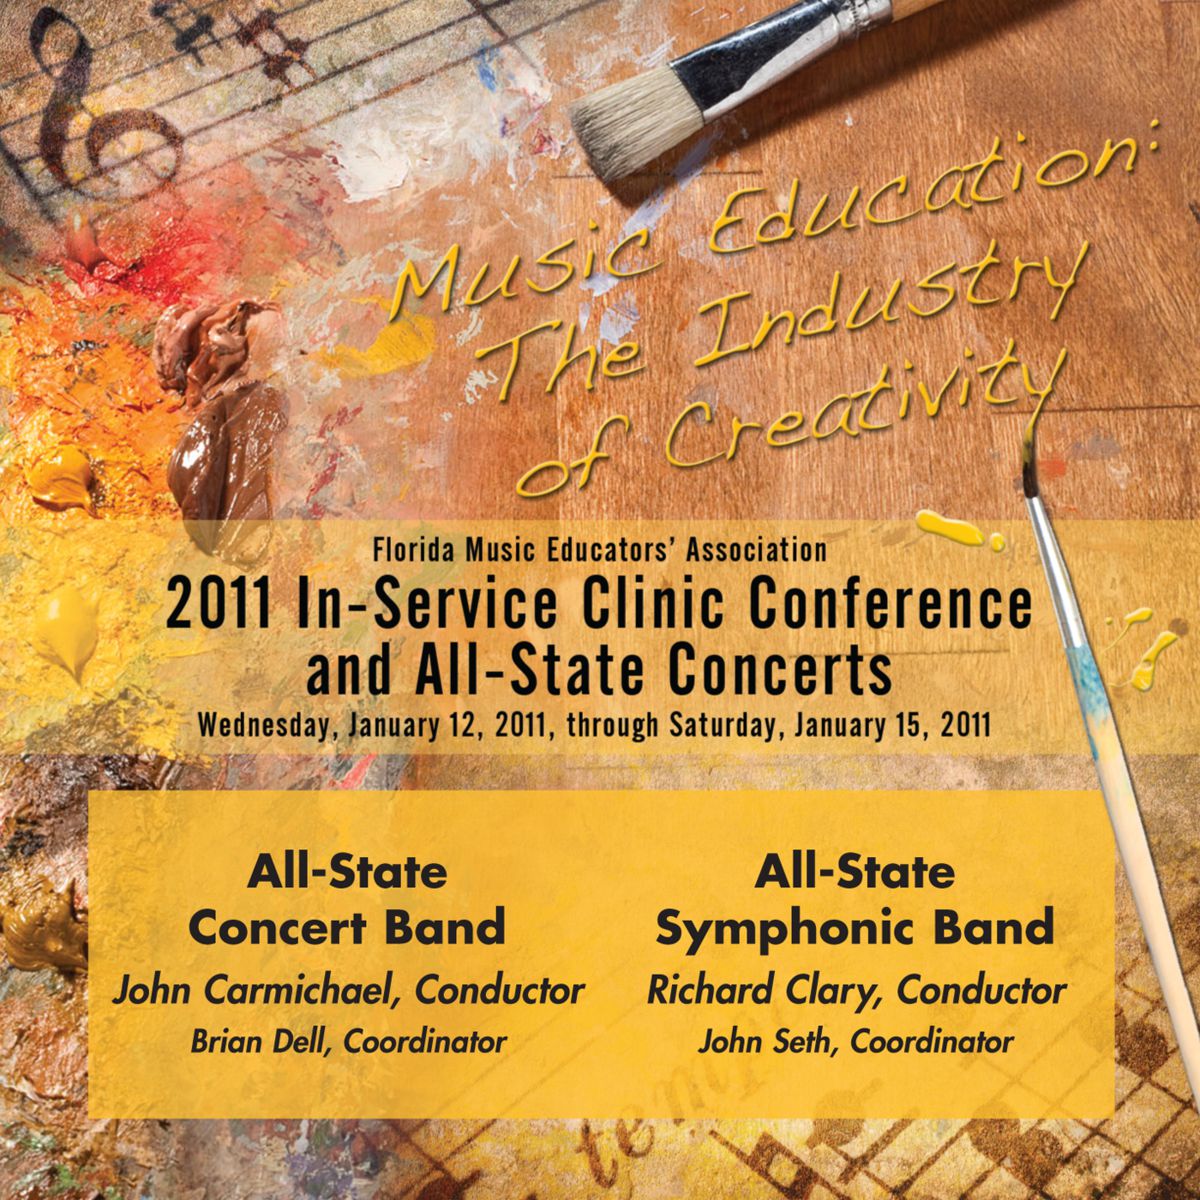 2011 Florida Music Educators Association: All-State Concert Band and All-State Symphonic Band - click here